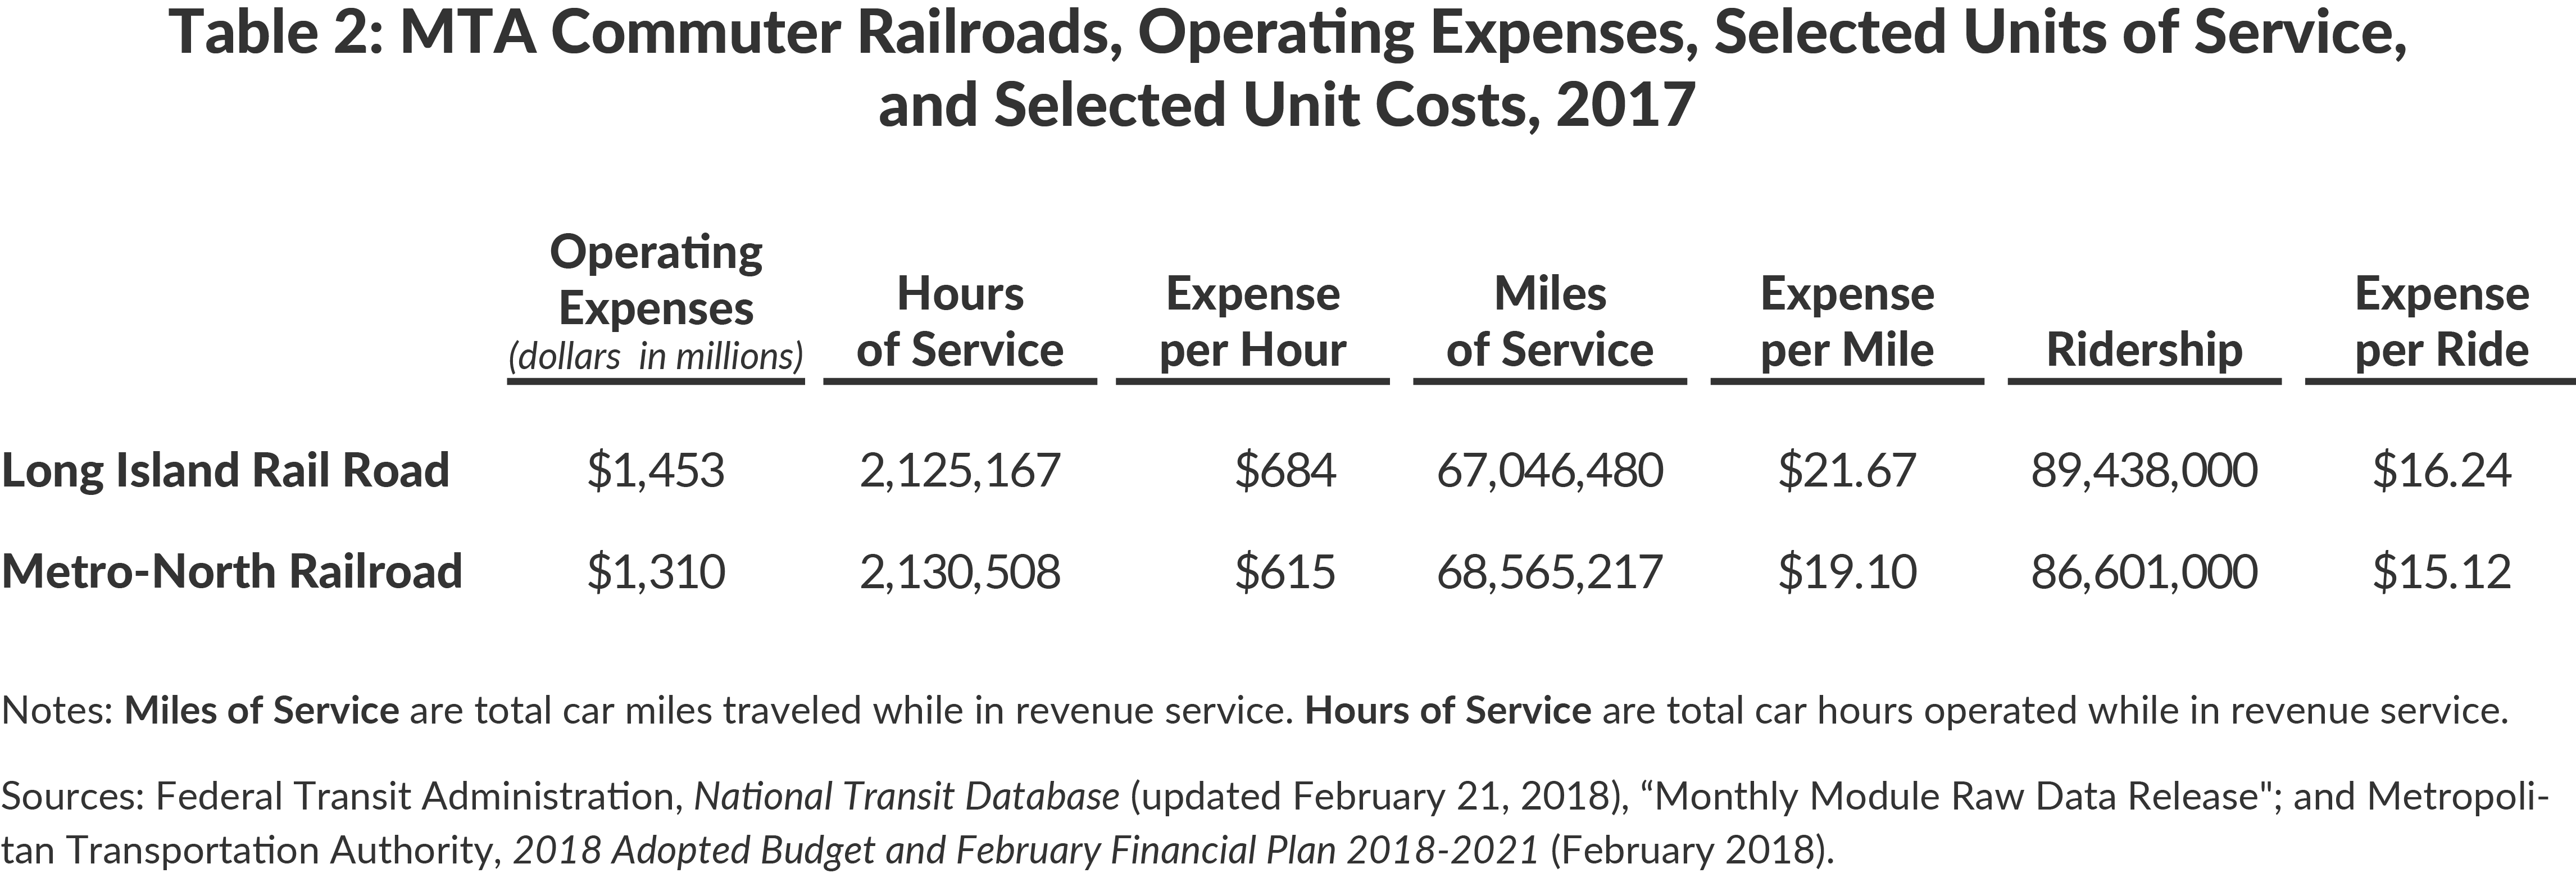 Table 2: MTA Commuter Railroads, Operating Expenses, Selected Units of Service, and Selected Unit Costs, 2017